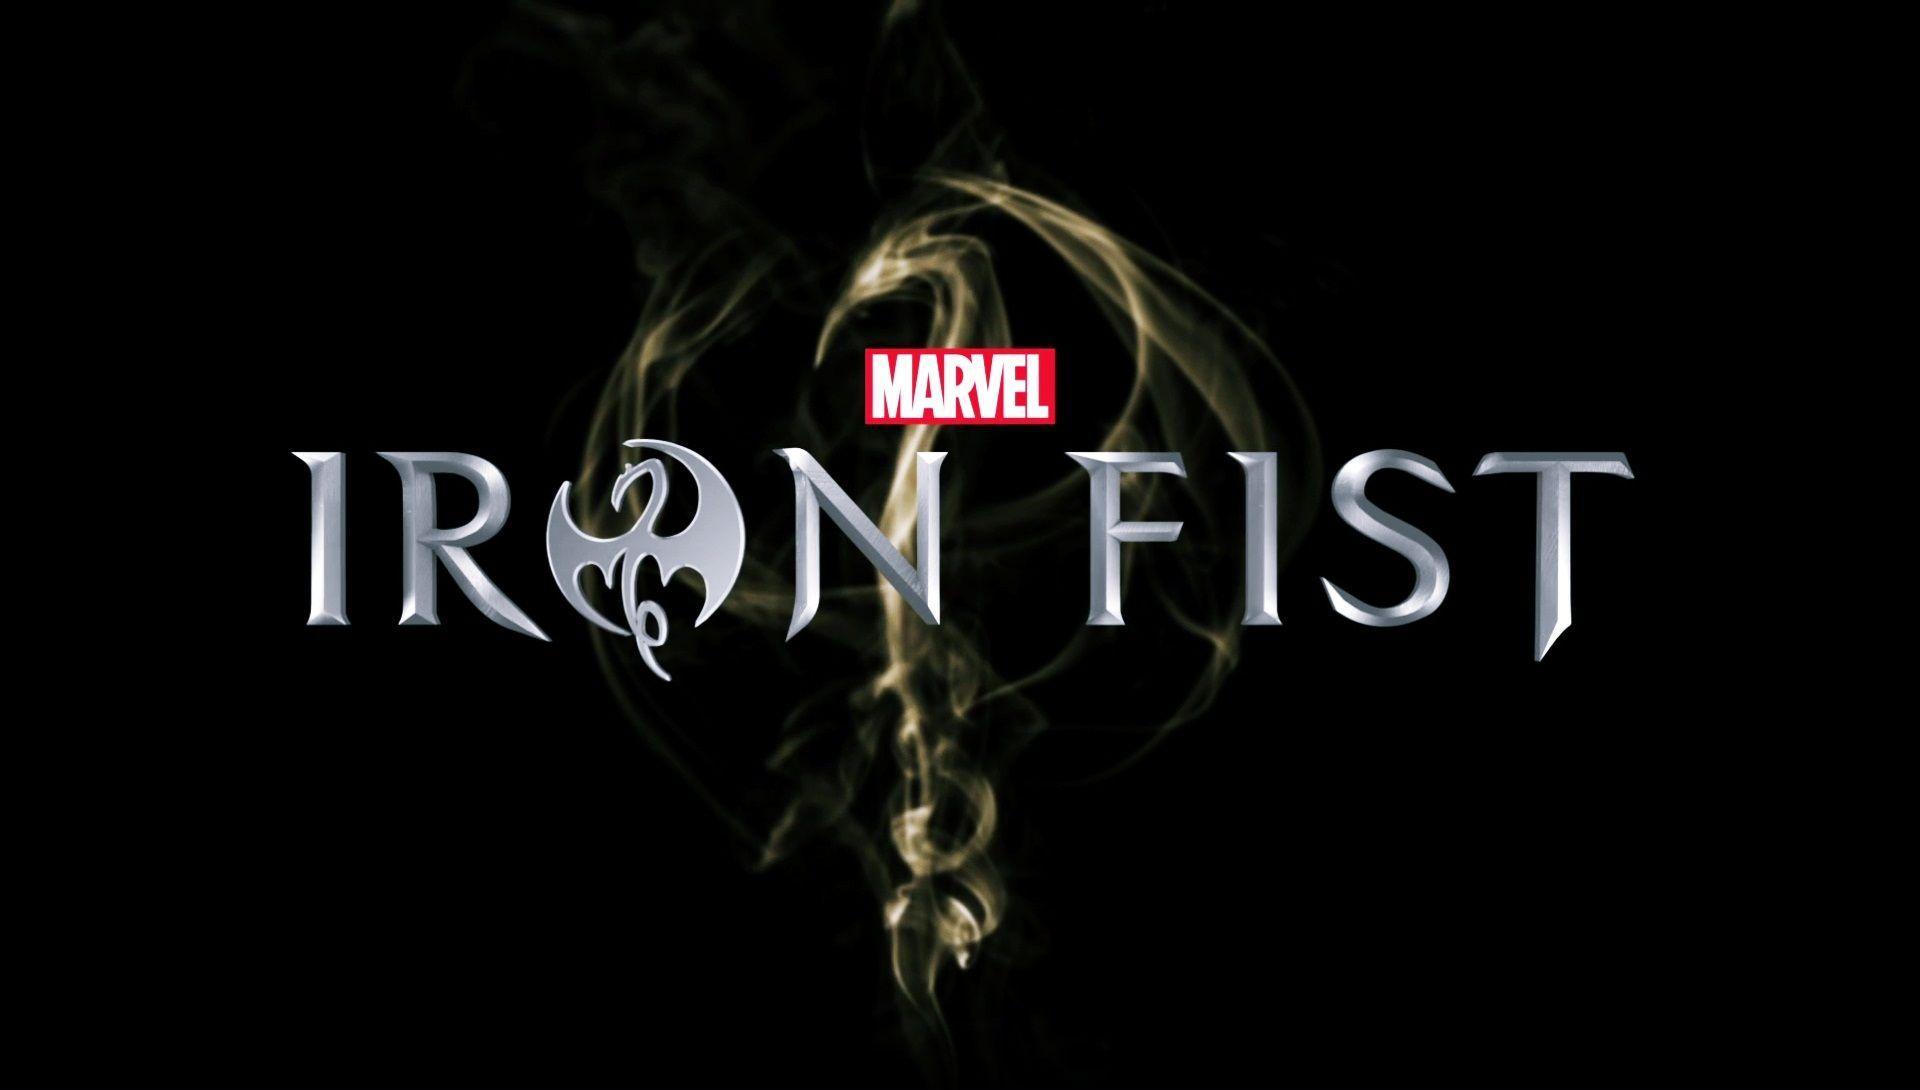 Iron Fist Wallpapers 2K Backgrounds, Wallpaper, Pics, Photos Free